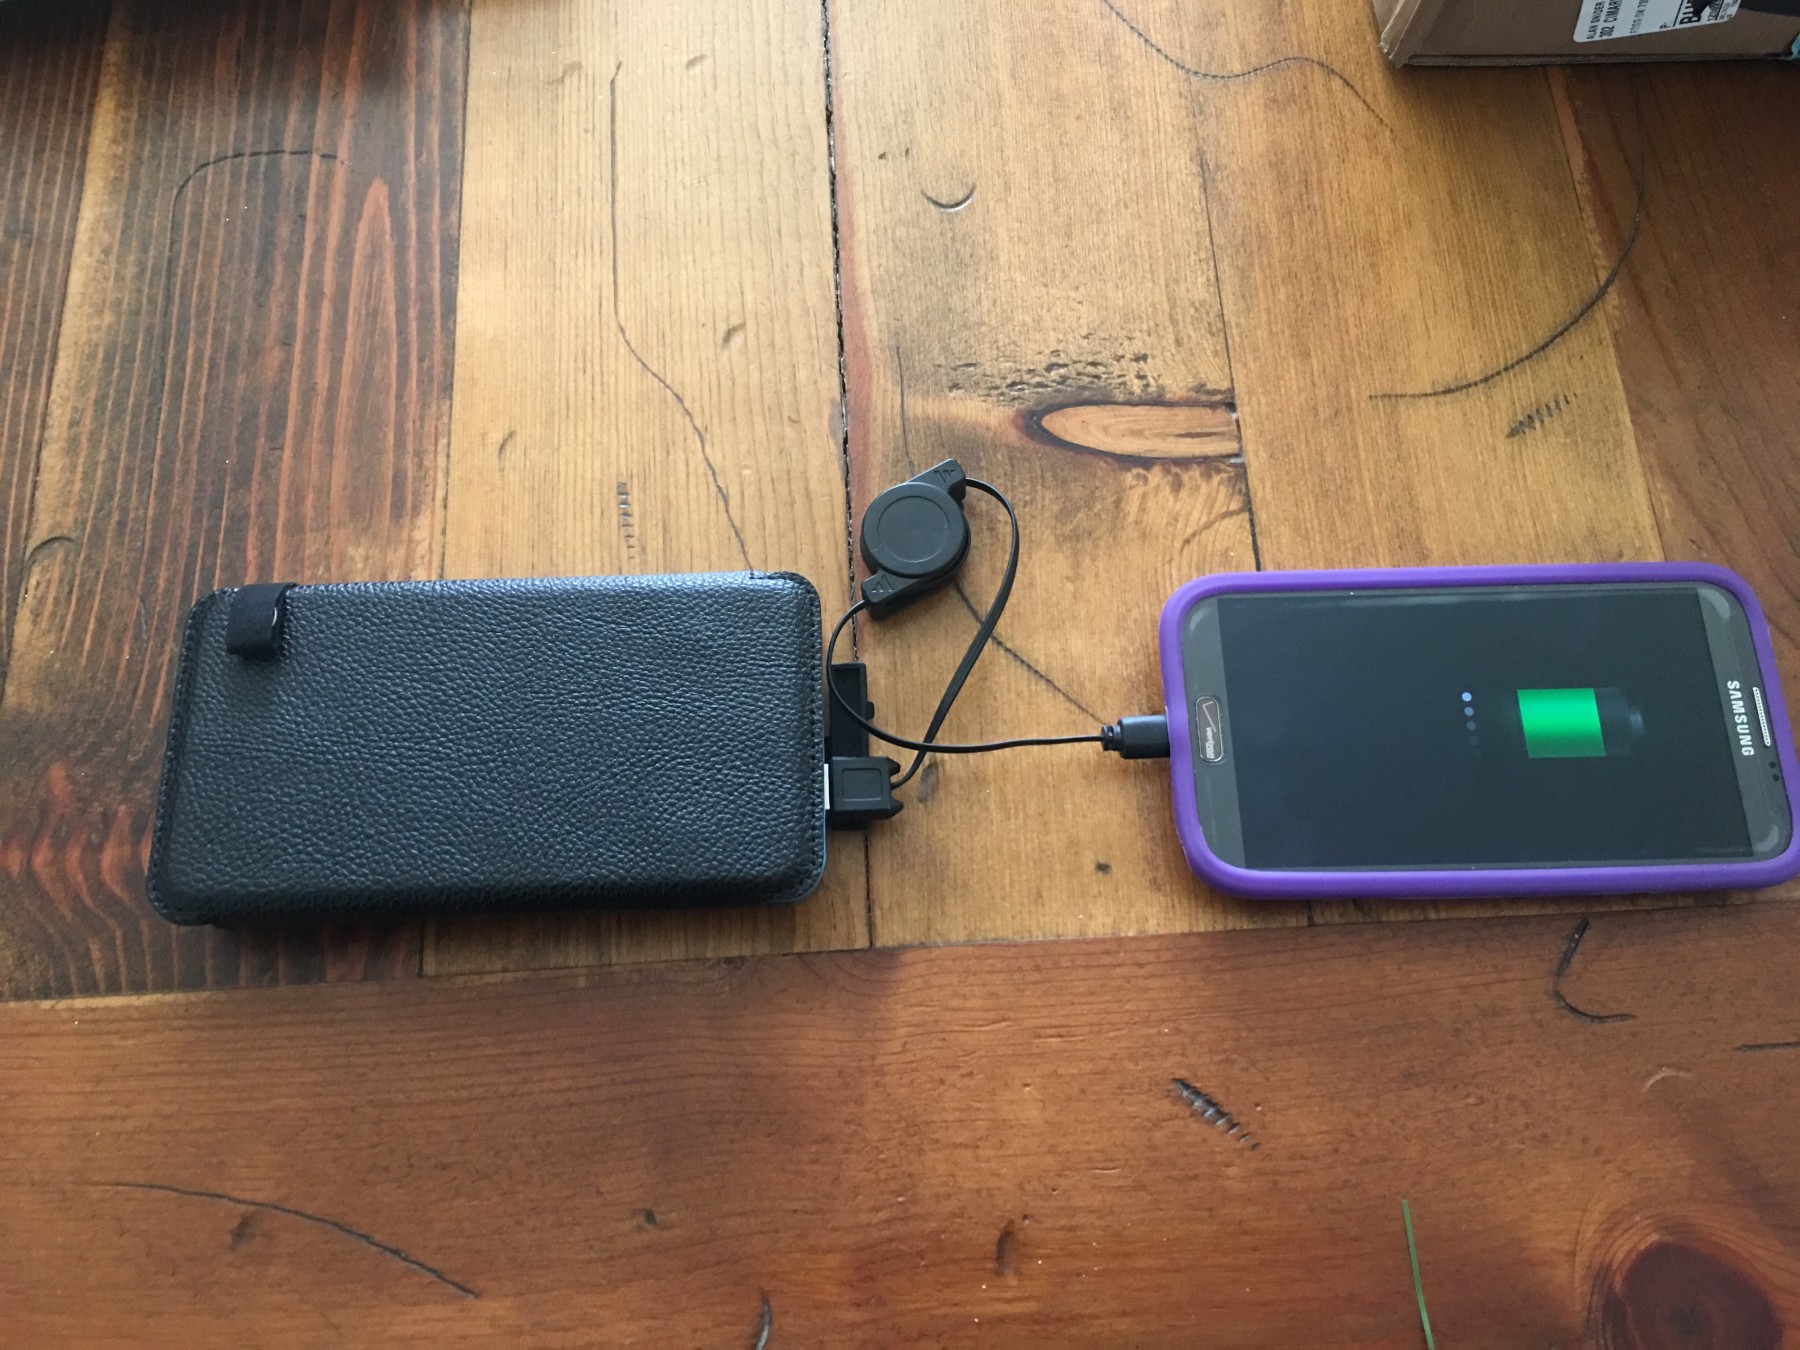 Power bank that recharges itself!